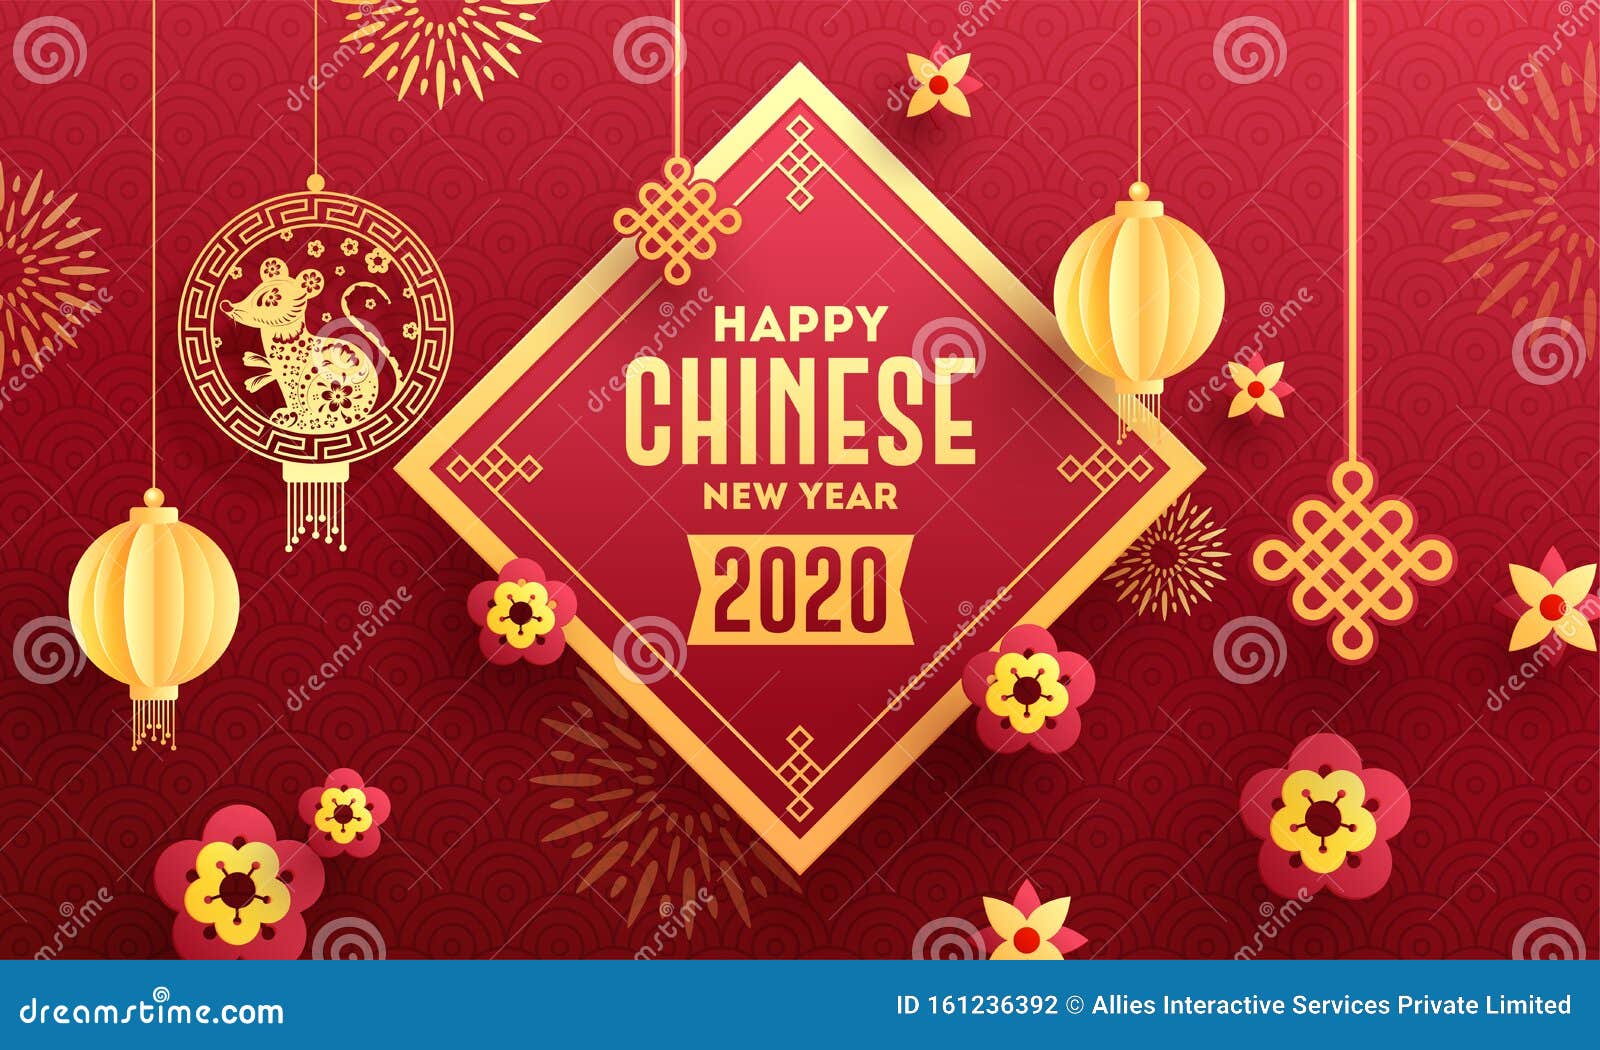 Happy Chinese New Year 2020 Celebration Greeting Card Design ...